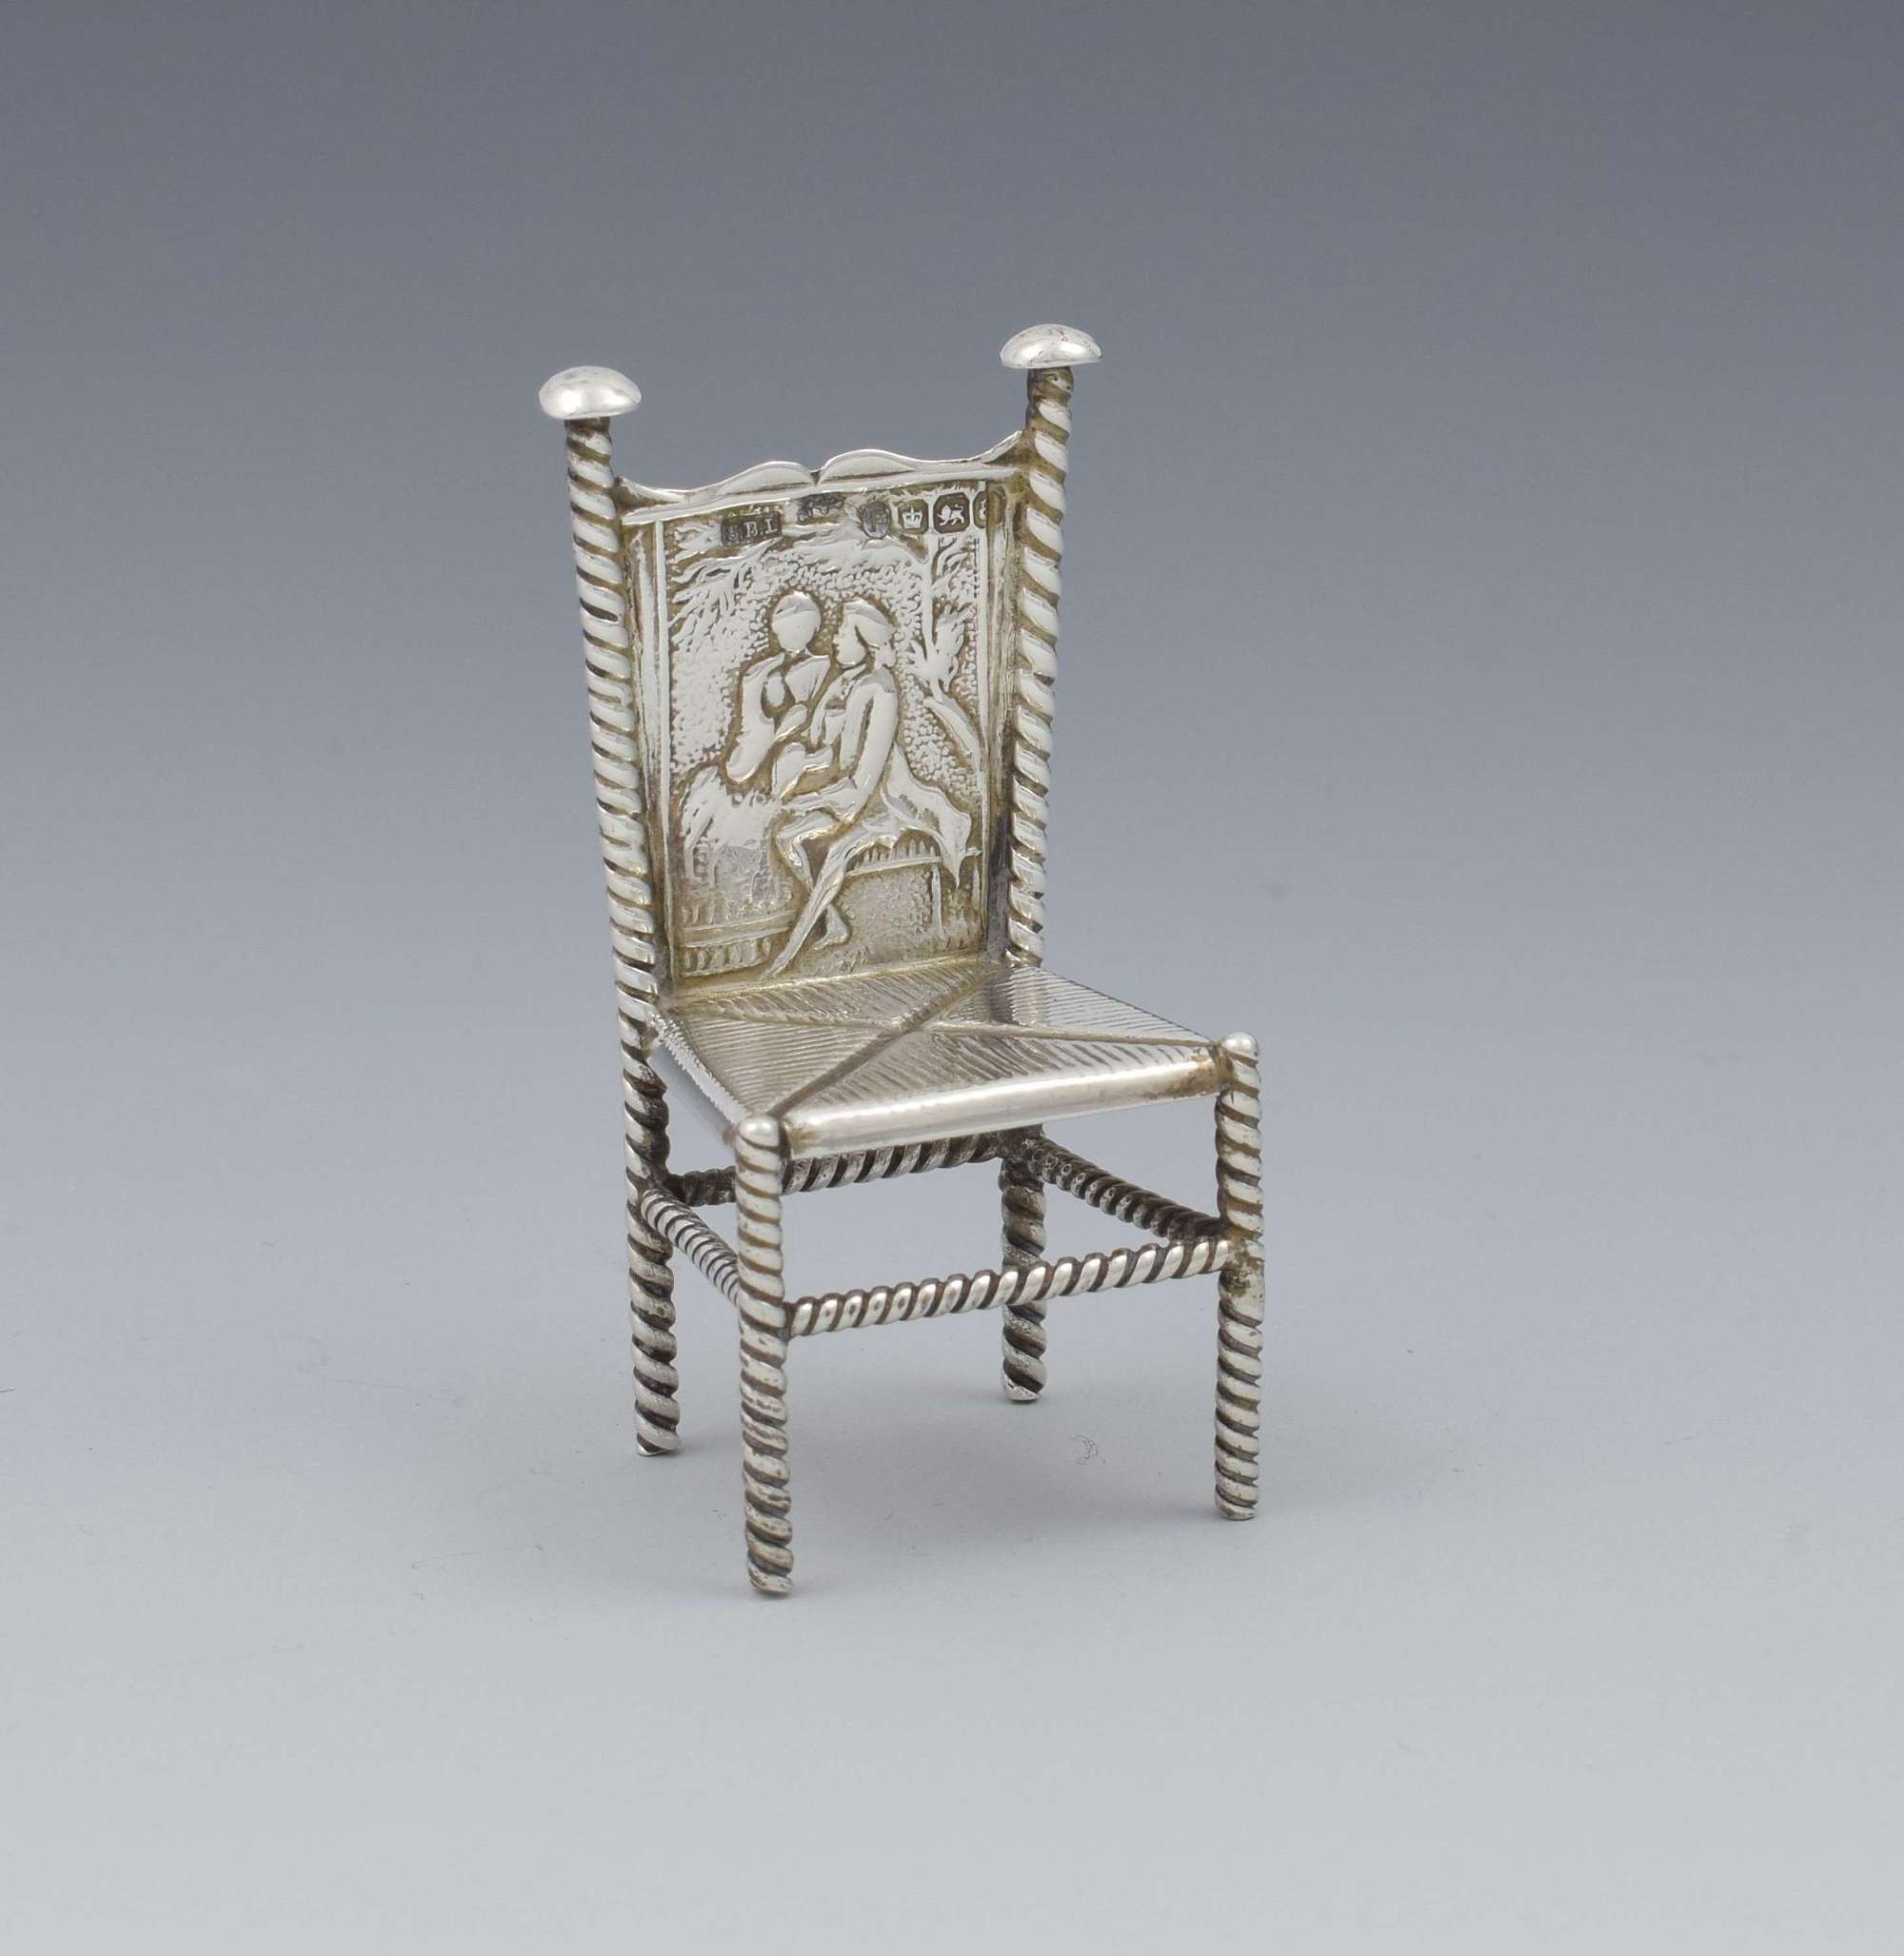 Late 19th Century Dutch Silver Miniature Chair Import Marks 1893